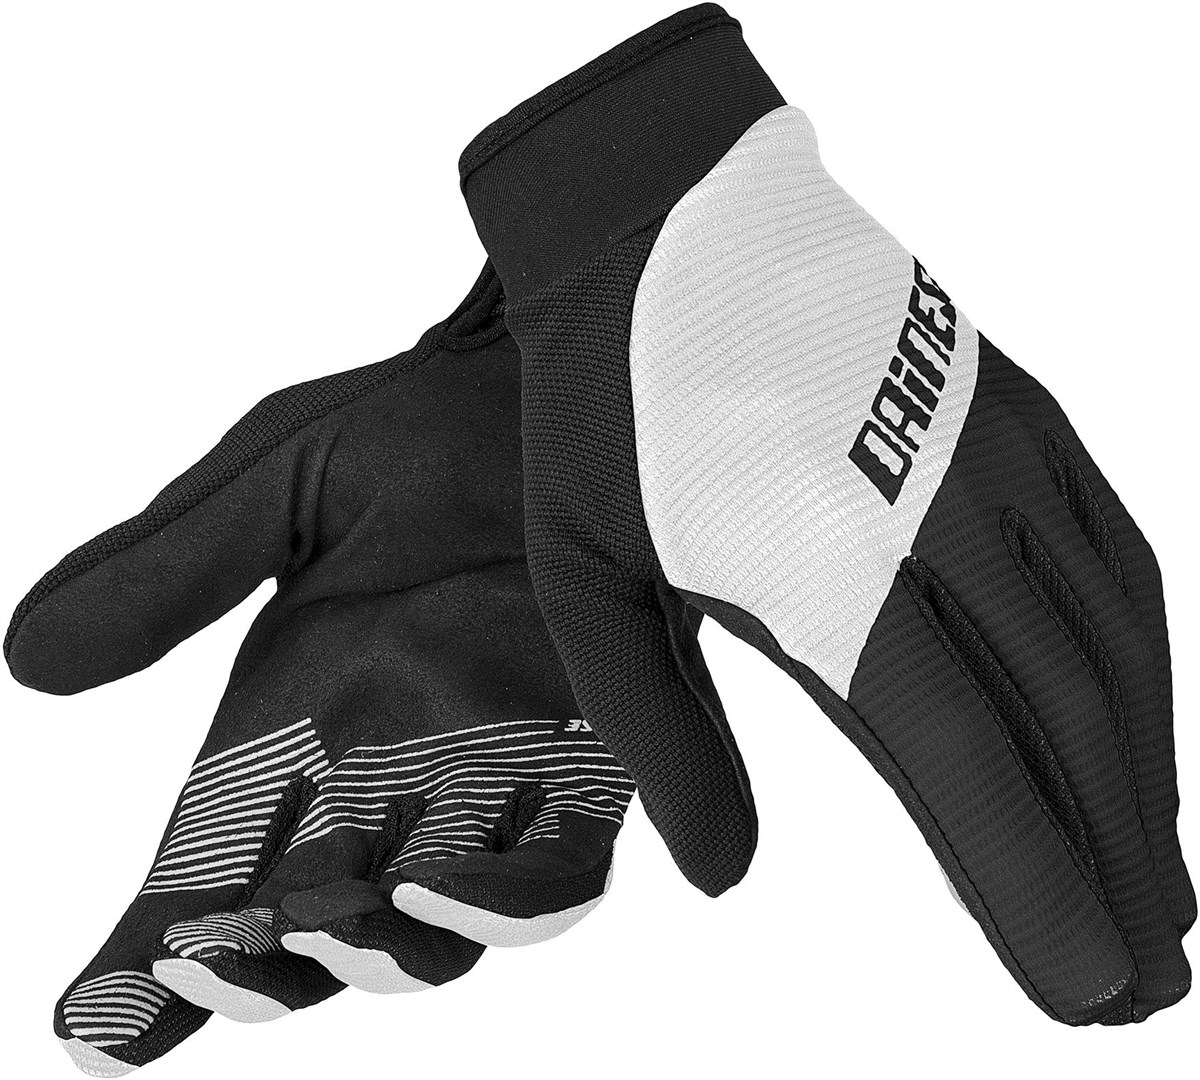 Dainese Rock Solid-C Long Finger Gloves product image